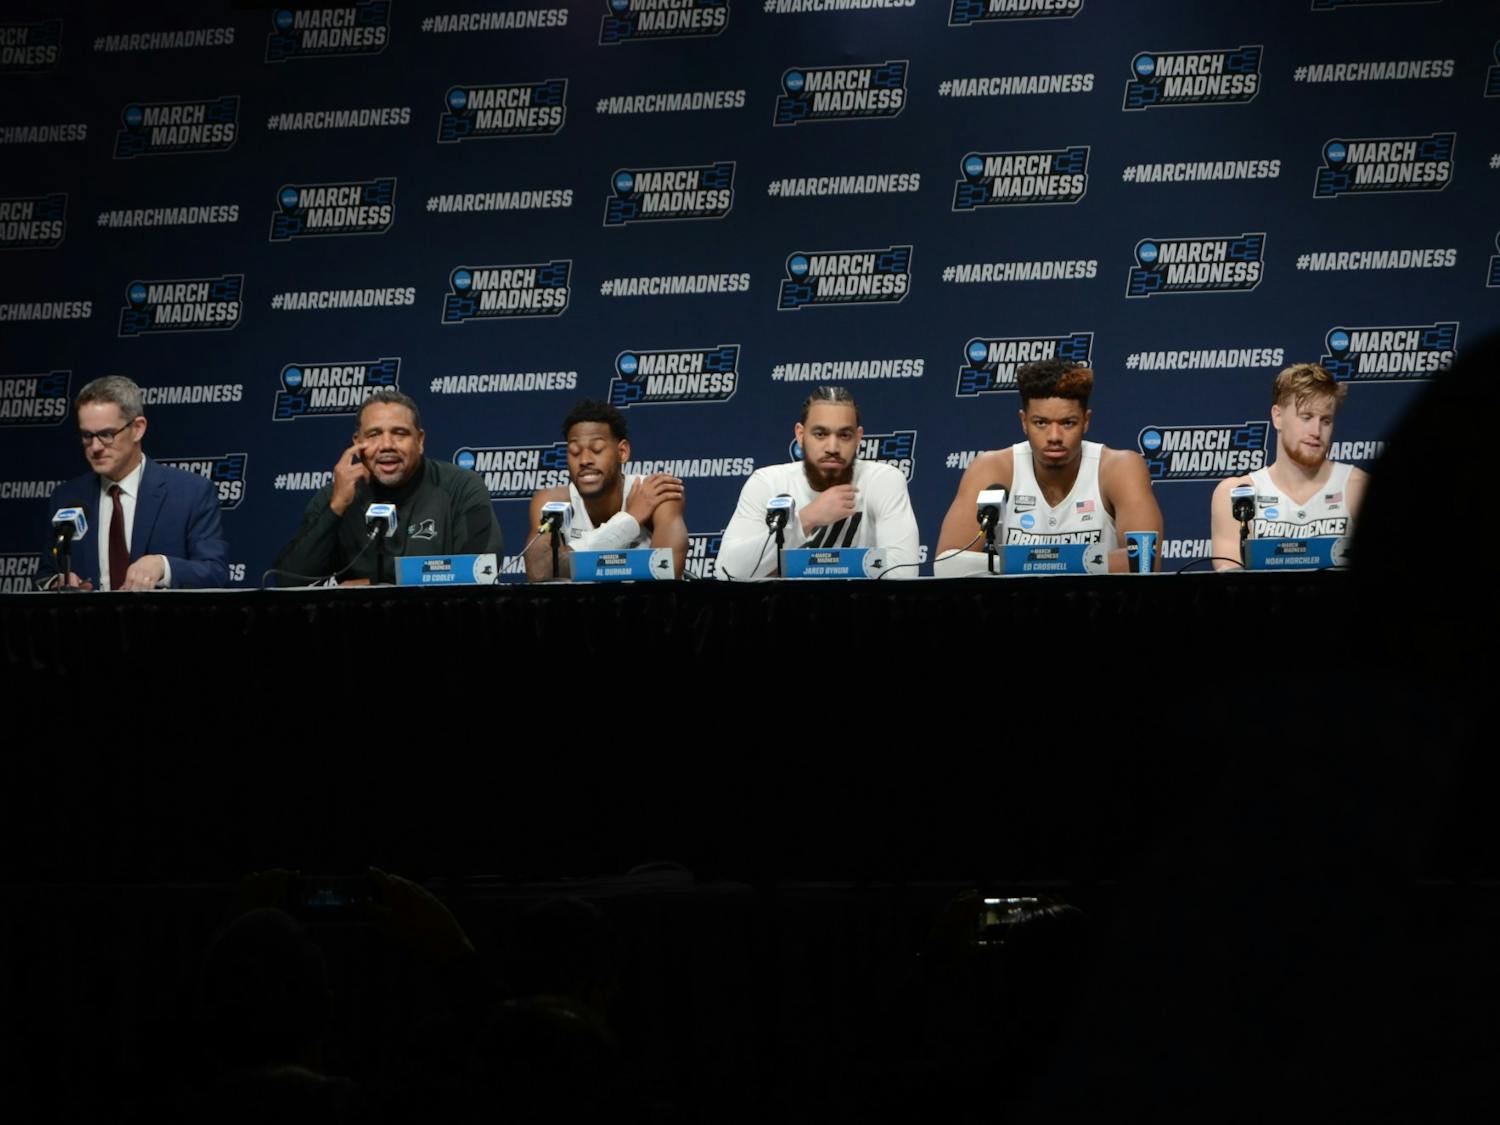 Head coach Ed Cooley (second from left) and members of the Providence Friars men's basketball team answer questions from the media following the team's 66-57 victory over South Dakota State Thursday.